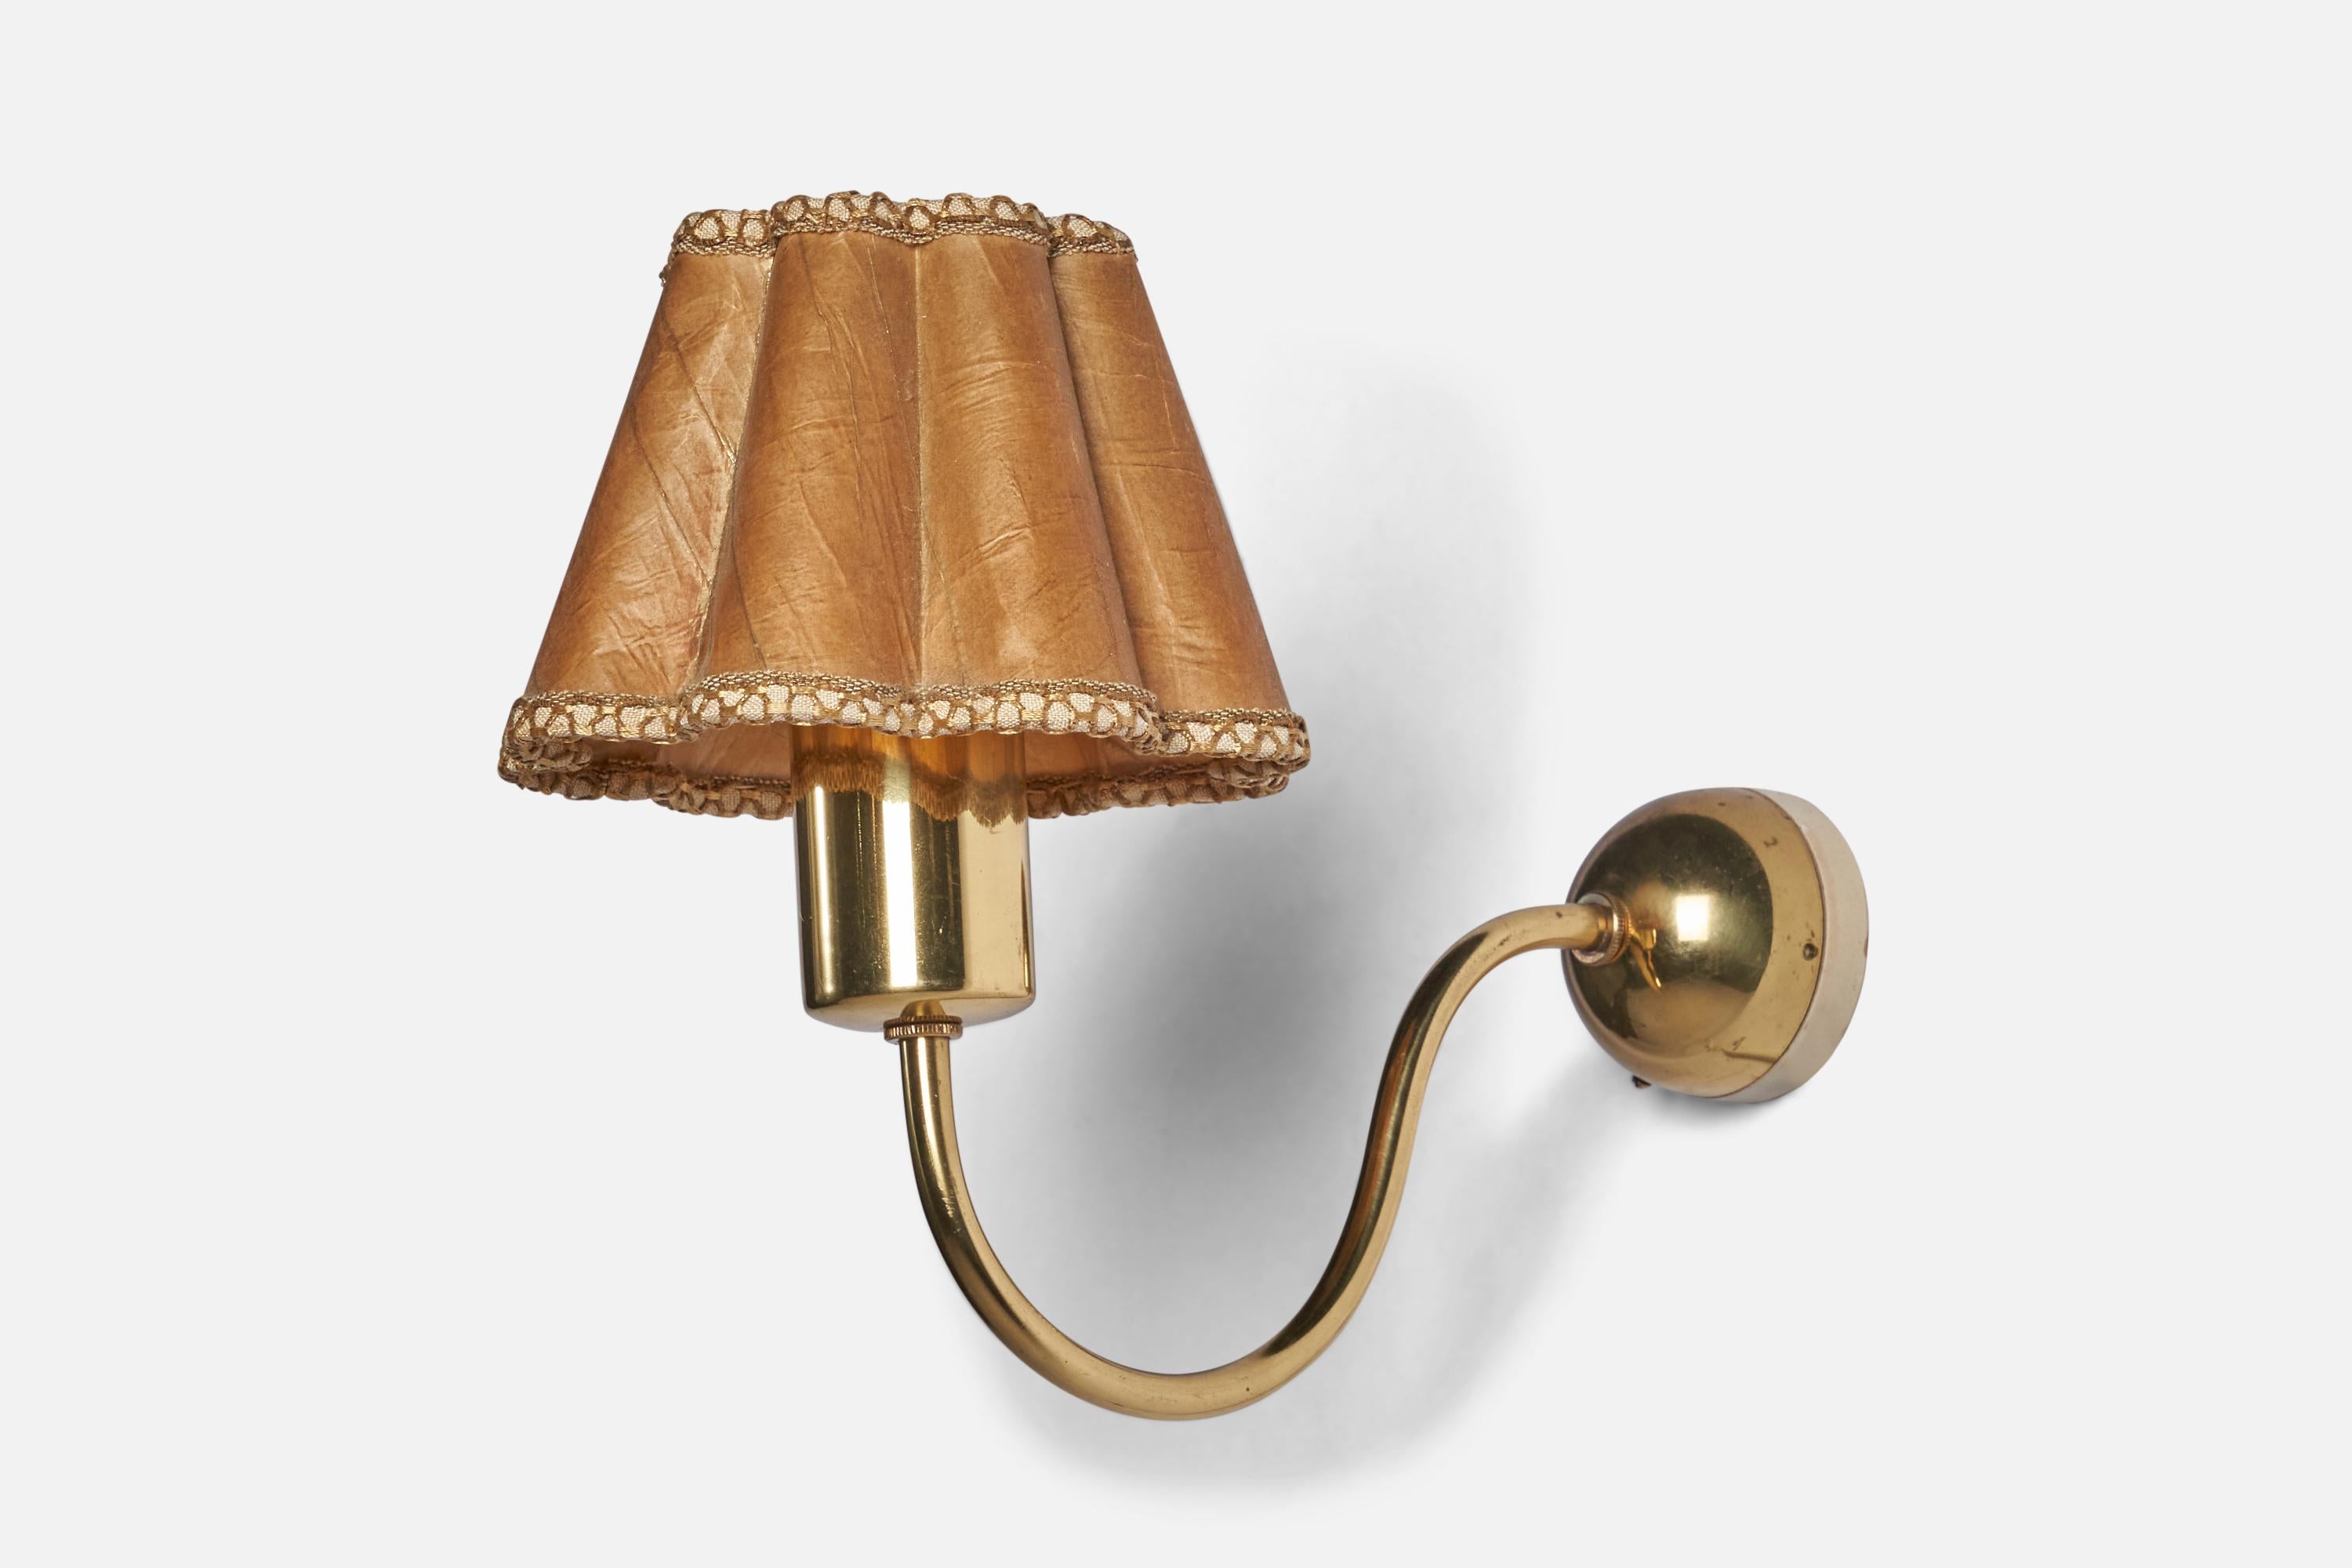 A brass and parchment paper wall light designed by Josef Frank and produced by Svenskt Tenn, Sweden, 1950s.

Overall Dimensions (inches): 9” H x 6” W x 11.5” D
Back Plate Dimensions (inches): 2.5” Diameter
Bulb Specifications: E-26 Bulb
Number of